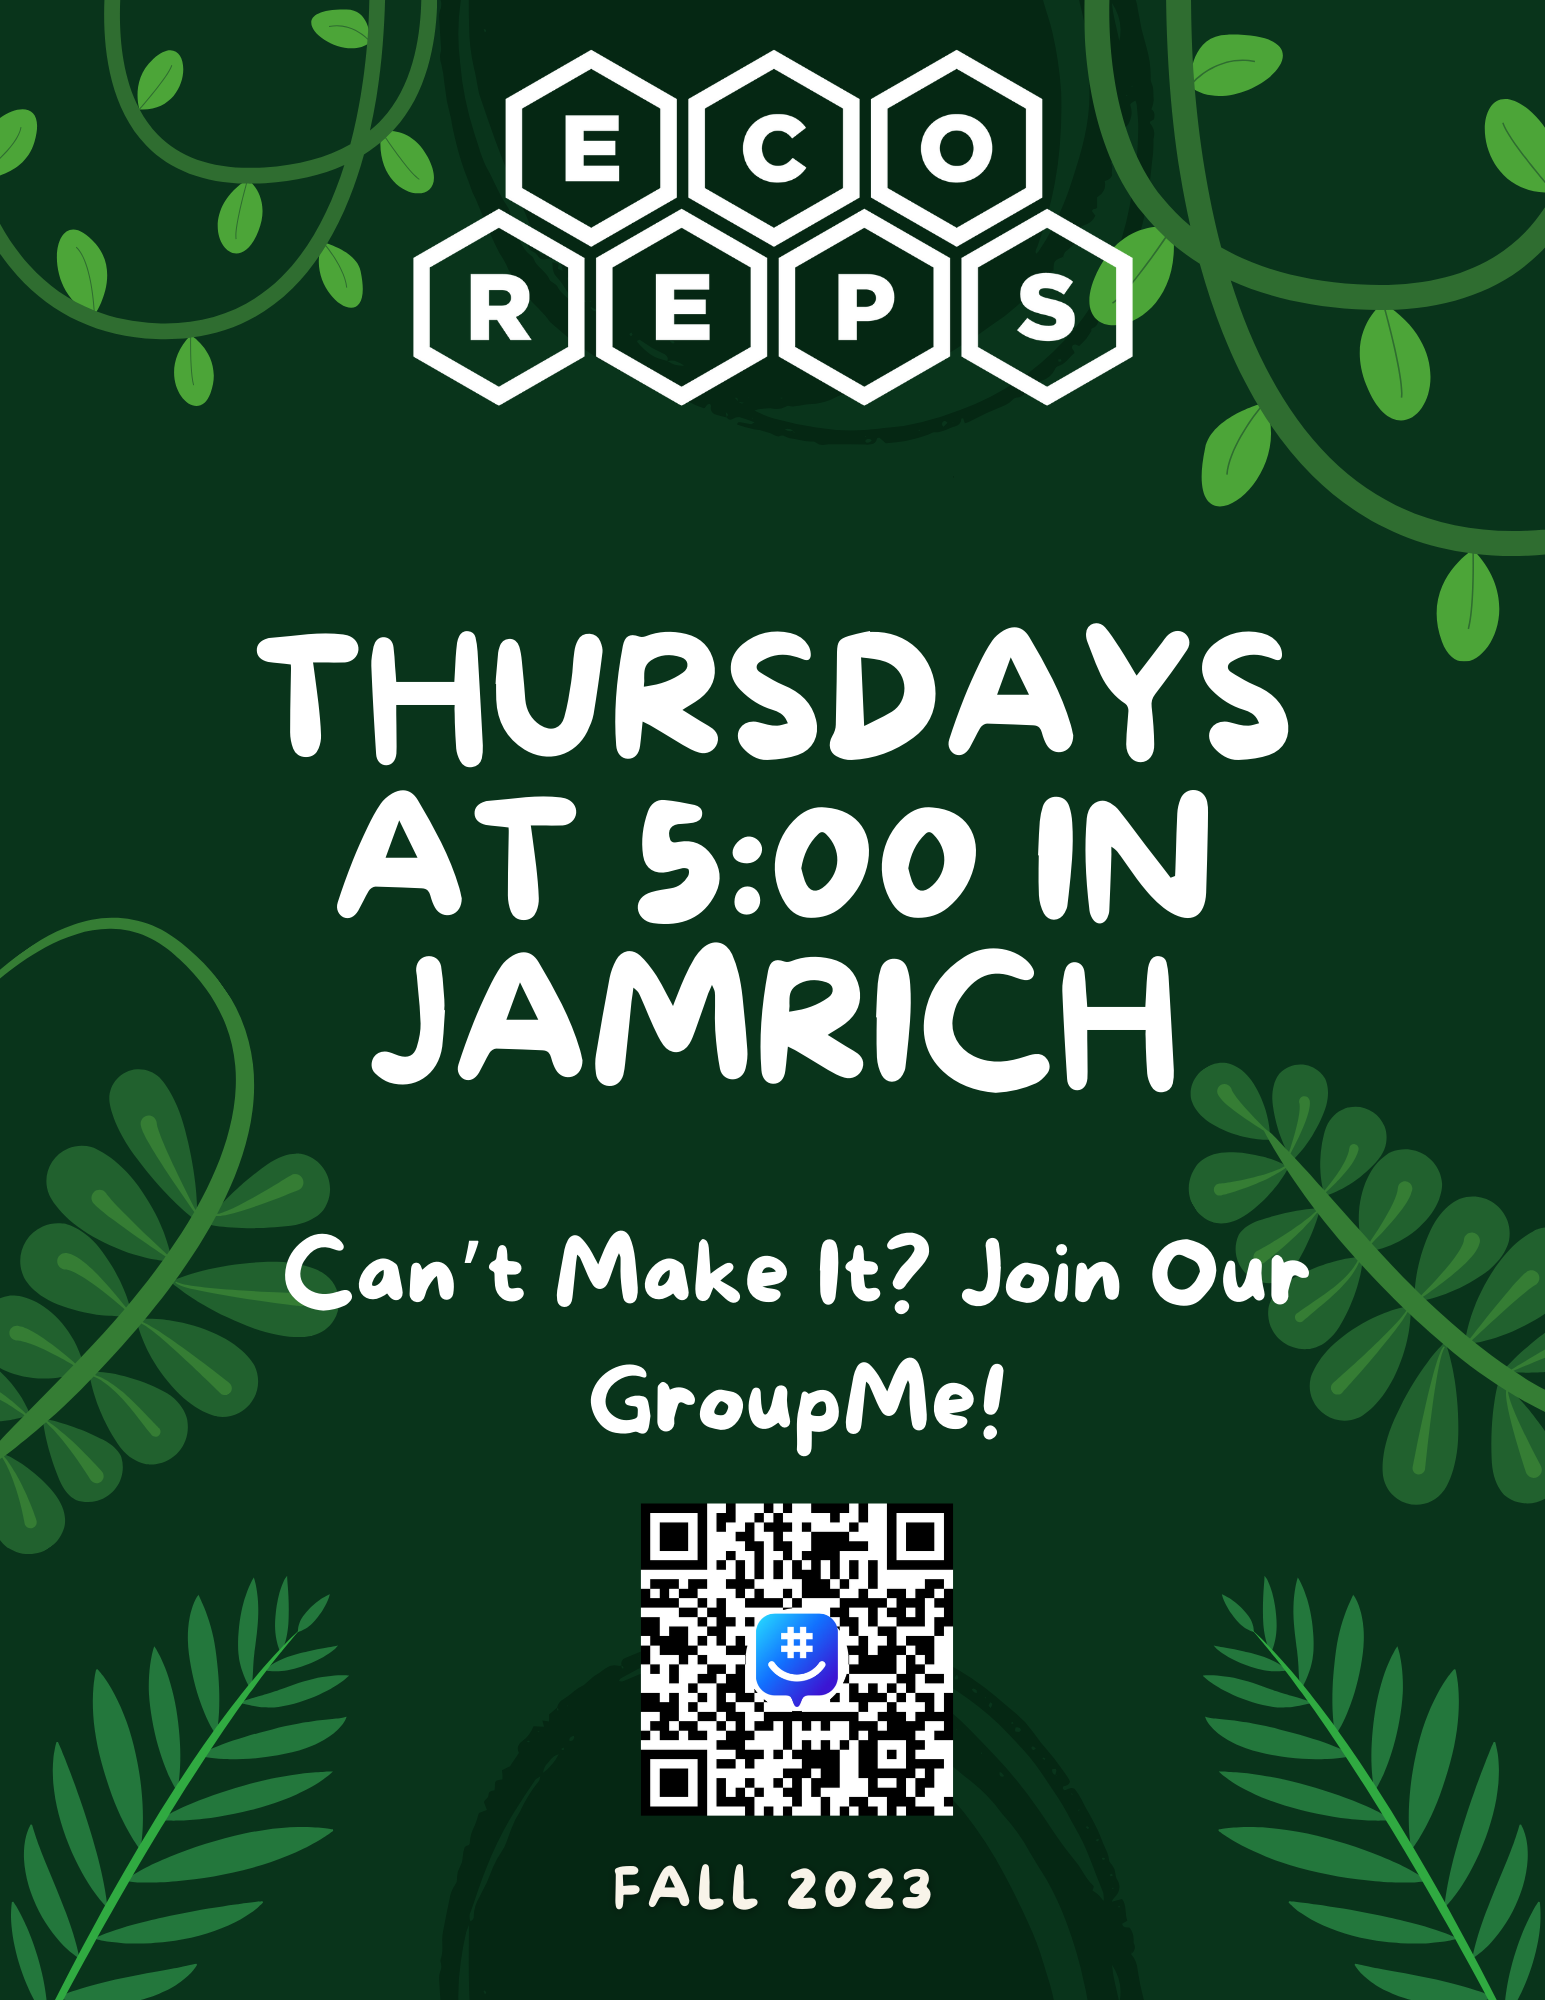 EcoReps Meeting Poster, Including QR Code to Join GroupMe